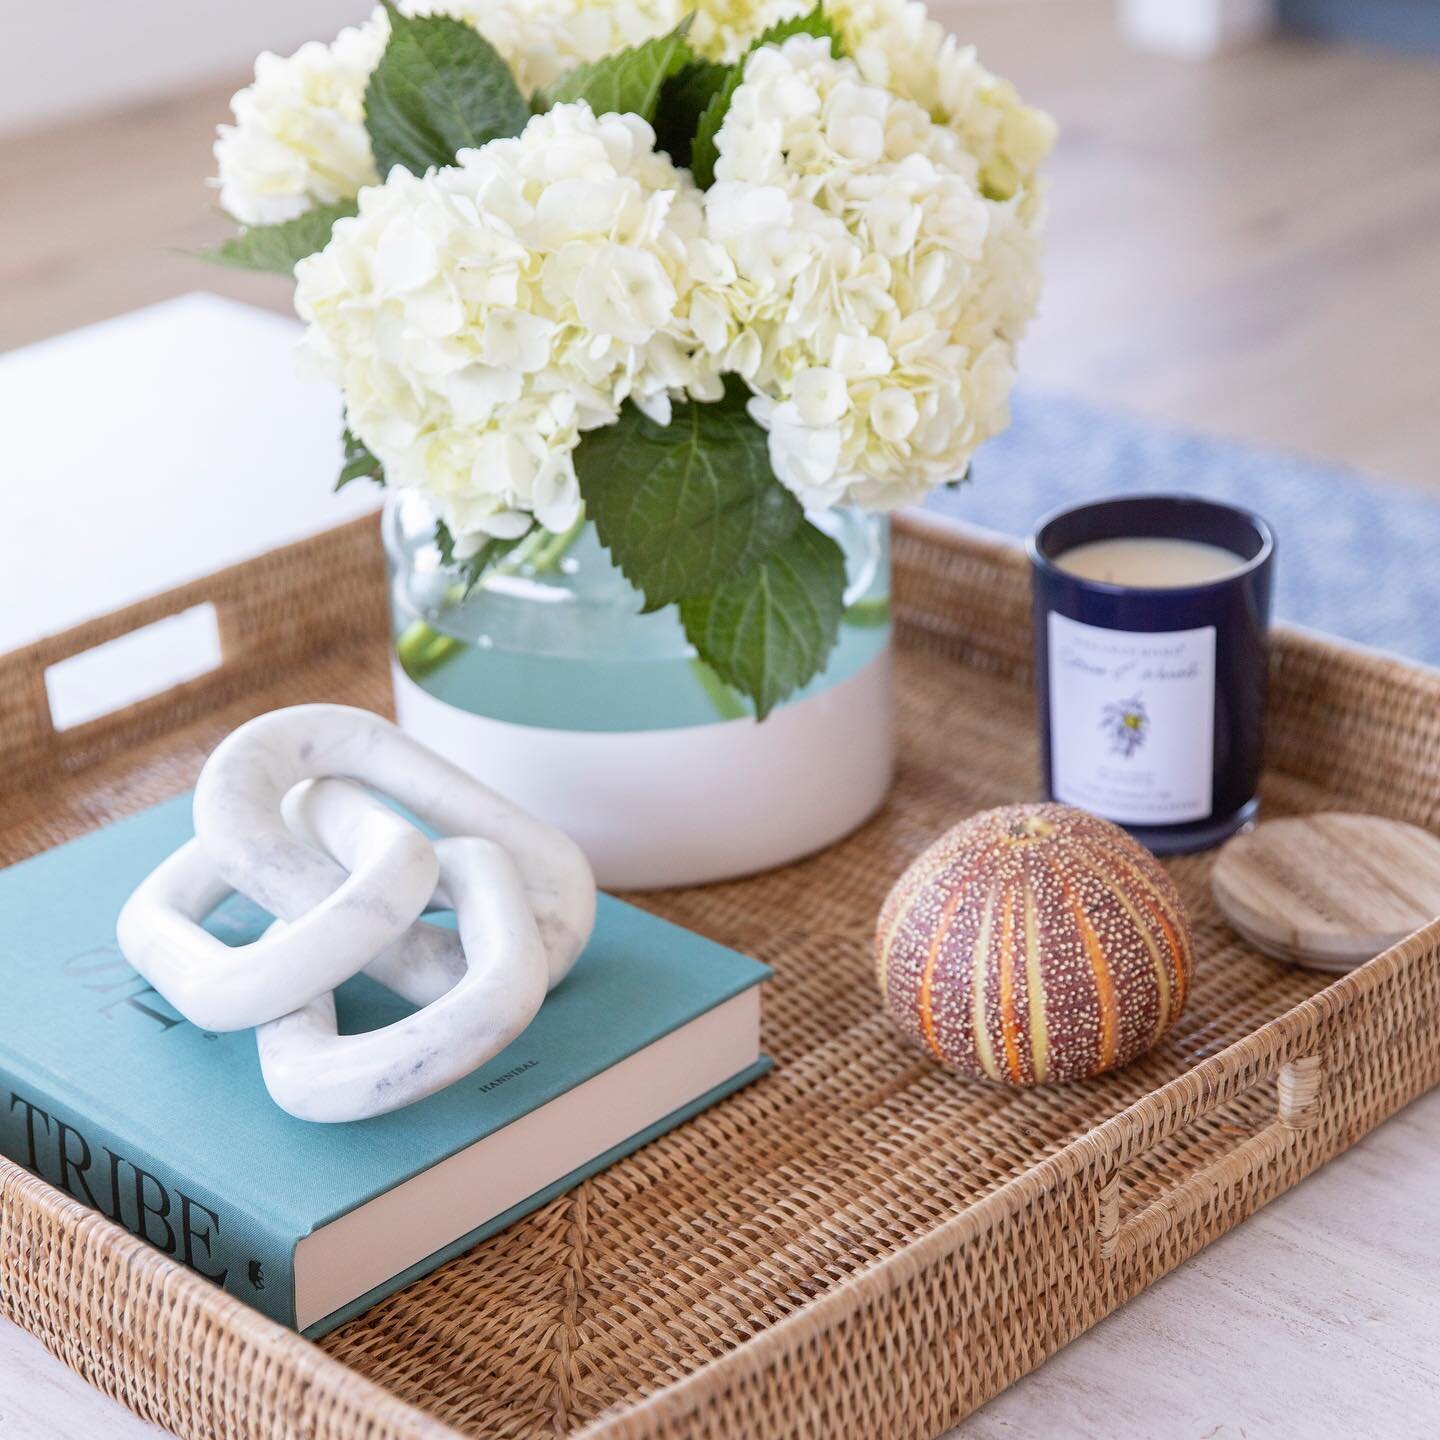 Loving everything on this tray especially the vase from @etu.home 
Photo: @adrianamichelephotography